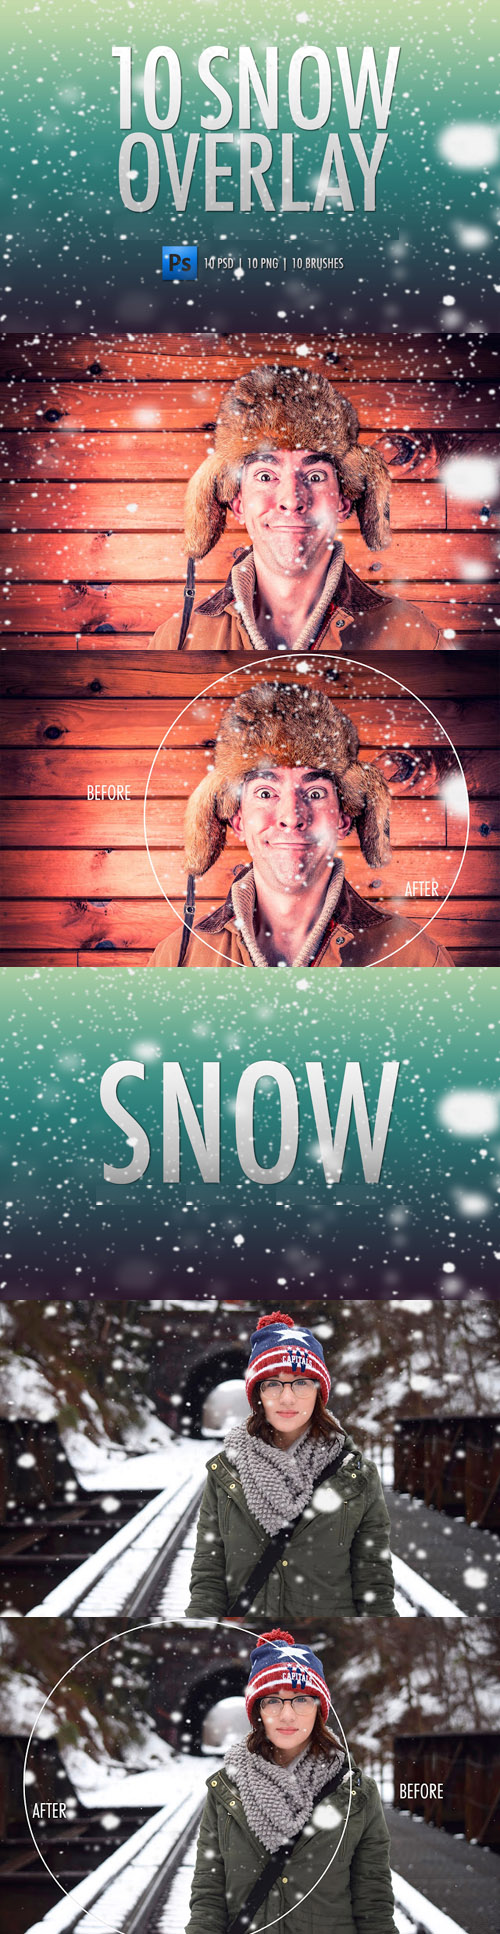 10 Snow Overlays for Photoshop [PSD/ABR/PNG]